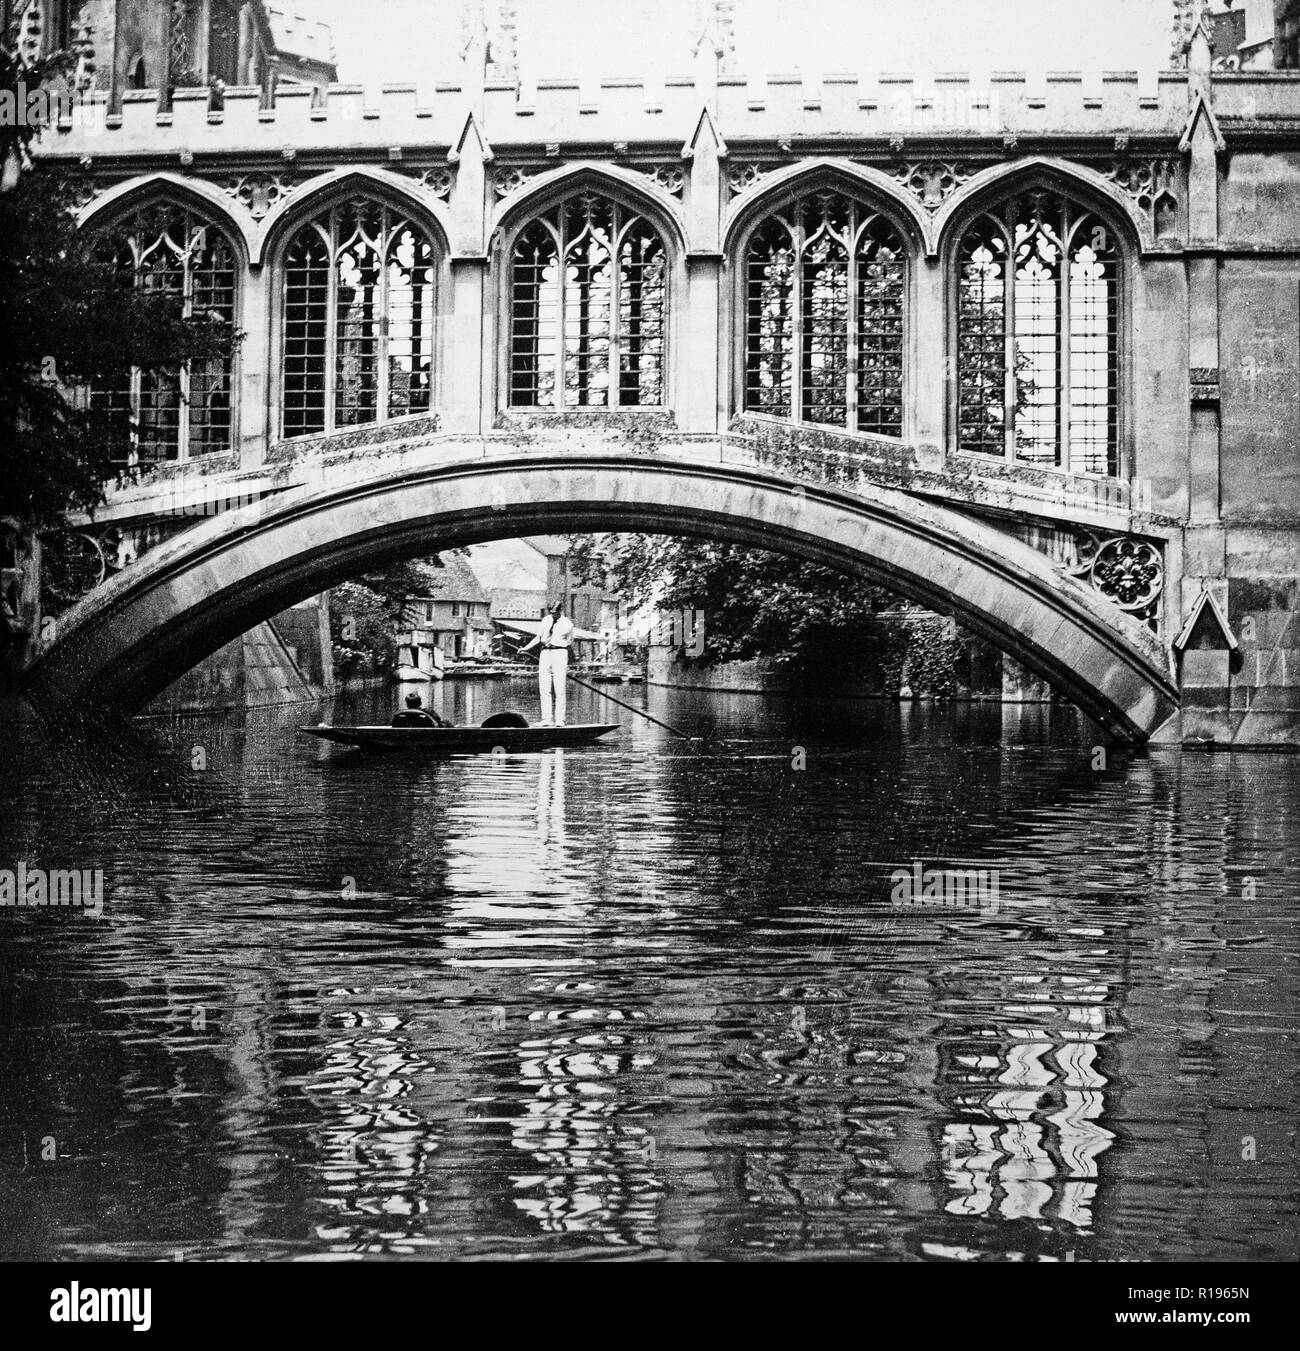 Black and white vintage photograph taken in 1924 showing the Bridge Of Sighs, a covered bridge at St.John's College, Cambridge, England. It was built in 1831 and crosses the River Cam between the college's Third Court and New Court. The architect was Henry Hutchinson. Photo shows a couple in punt, the traditional boat used on the river, with a man standing and using a pole. Stock Photo